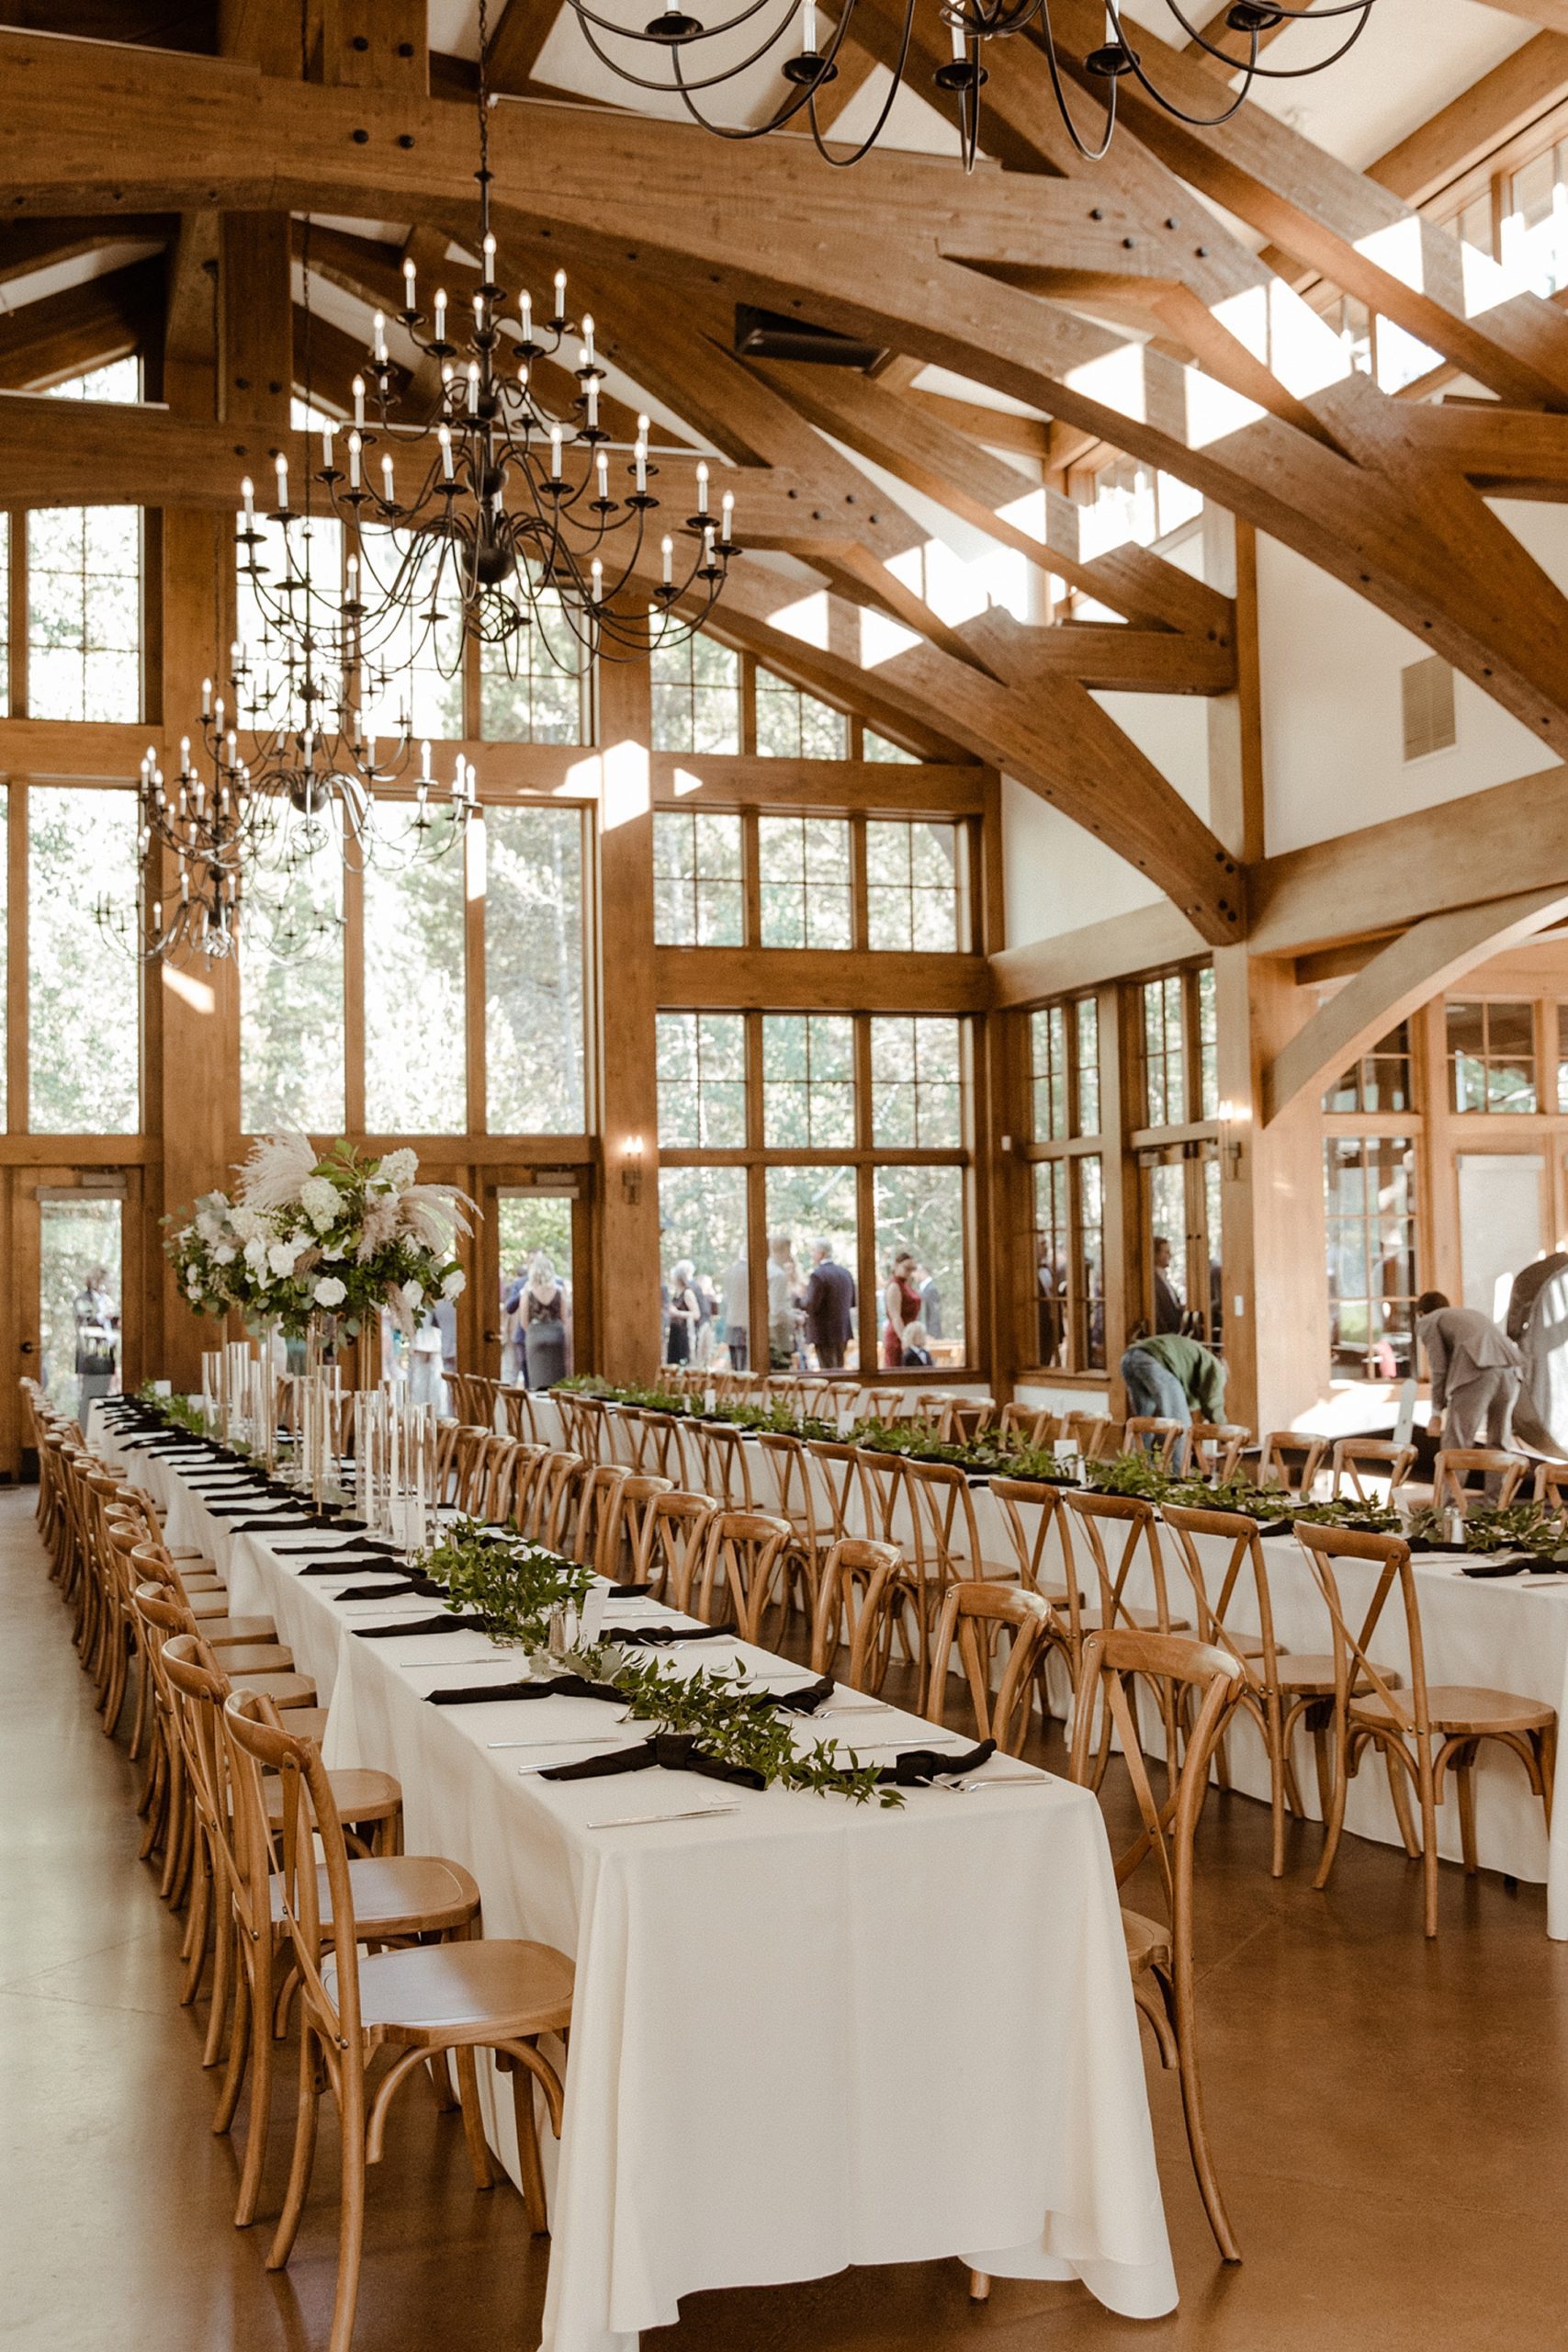 Inside the Donovan Pavilion in Vail, Colorado decorated for a dinner reception